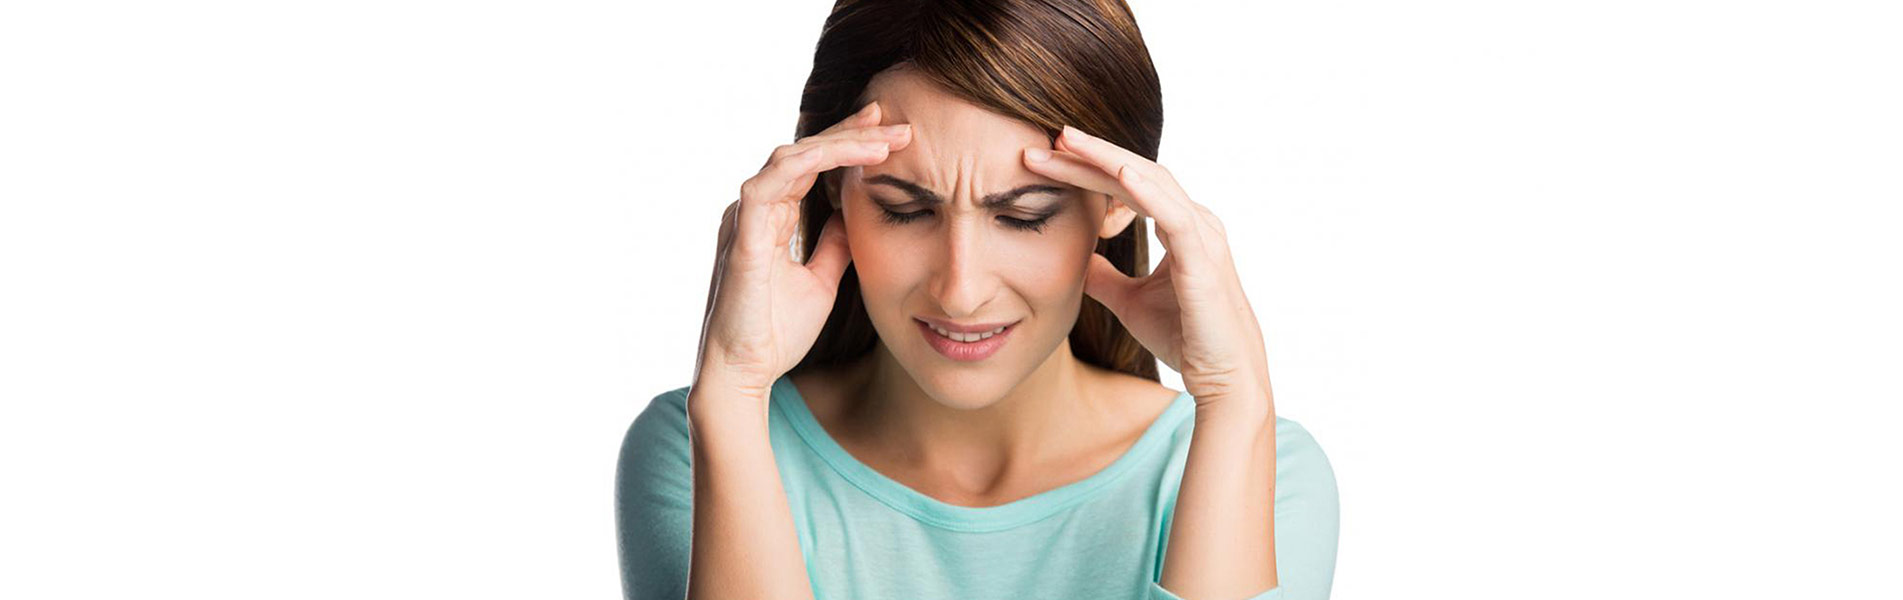 10 Surprising Remedies for Headaches That You Will Love!